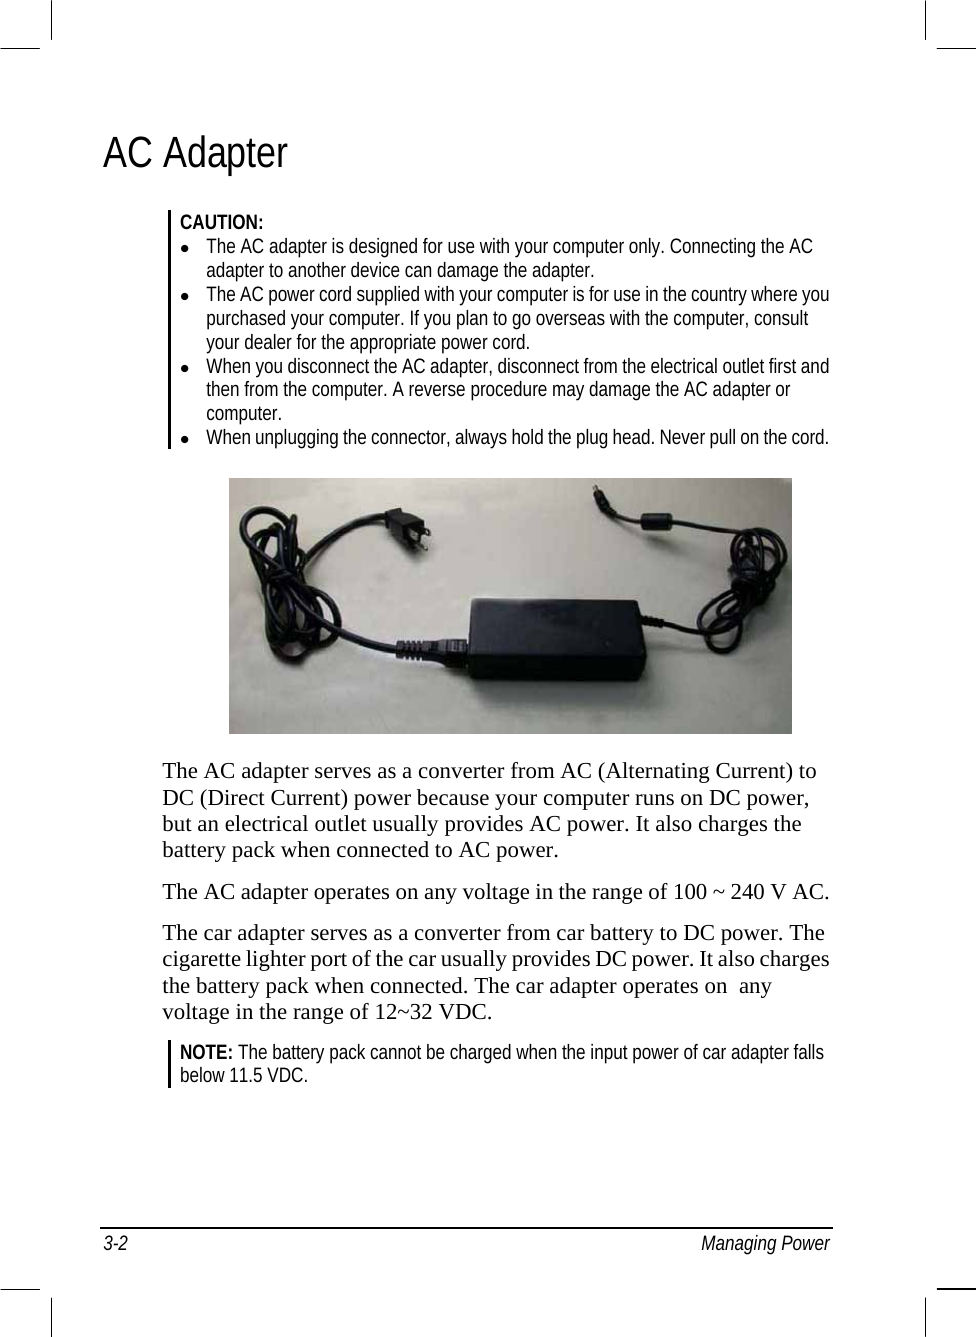  3-2 Managing Power AC Adapter CAUTION:   The AC adapter is designed for use with your computer only. Connecting the AC adapter to another device can damage the adapter.   The AC power cord supplied with your computer is for use in the country where you purchased your computer. If you plan to go overseas with the computer, consult your dealer for the appropriate power cord.   When you disconnect the AC adapter, disconnect from the electrical outlet first and then from the computer. A reverse procedure may damage the AC adapter or computer.   When unplugging the connector, always hold the plug head. Never pull on the cord.         The AC adapter serves as a converter from AC (Alternating Current) to DC (Direct Current) power because your computer runs on DC power, but an electrical outlet usually provides AC power. It also charges the battery pack when connected to AC power. The AC adapter operates on any voltage in the range of 100 ~ 240 V AC. The car adapter serves as a converter from car battery to DC power. The cigarette lighter port of the car usually provides DC power. It also charges the battery pack when connected. The car adapter operates on  any voltage in the range of 12~32 VDC. NOTE: The battery pack cannot be charged when the input power of car adapter falls below 11.5 VDC. 